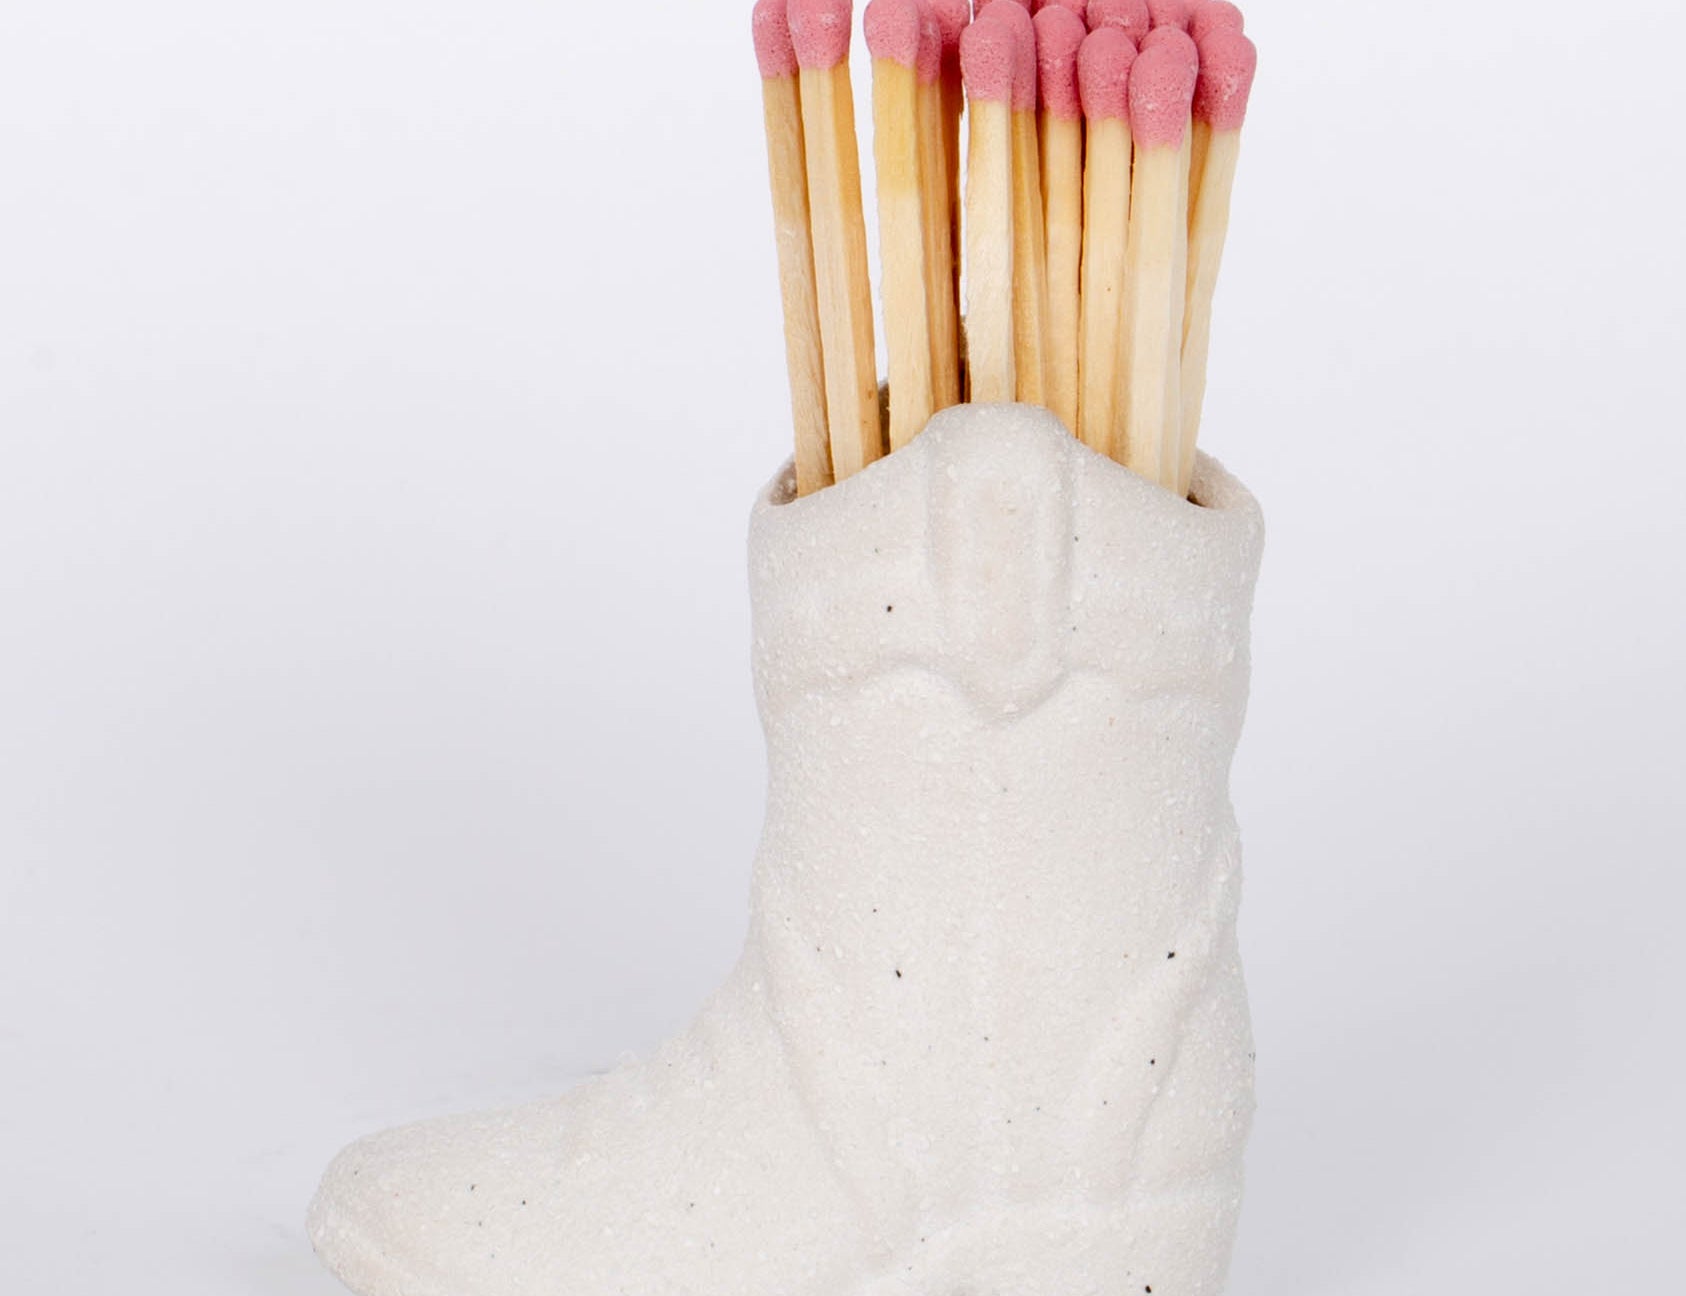 White Cowboy Boot Match Holder This vintage-inspired ceramic cowboy boot match holder includes 25 safety matches that are easily lit with a strike on the bottom of the boot! After the safety matches run out, this holder is compatible with any match and can provide light by striking on the rough ceramic surface. 